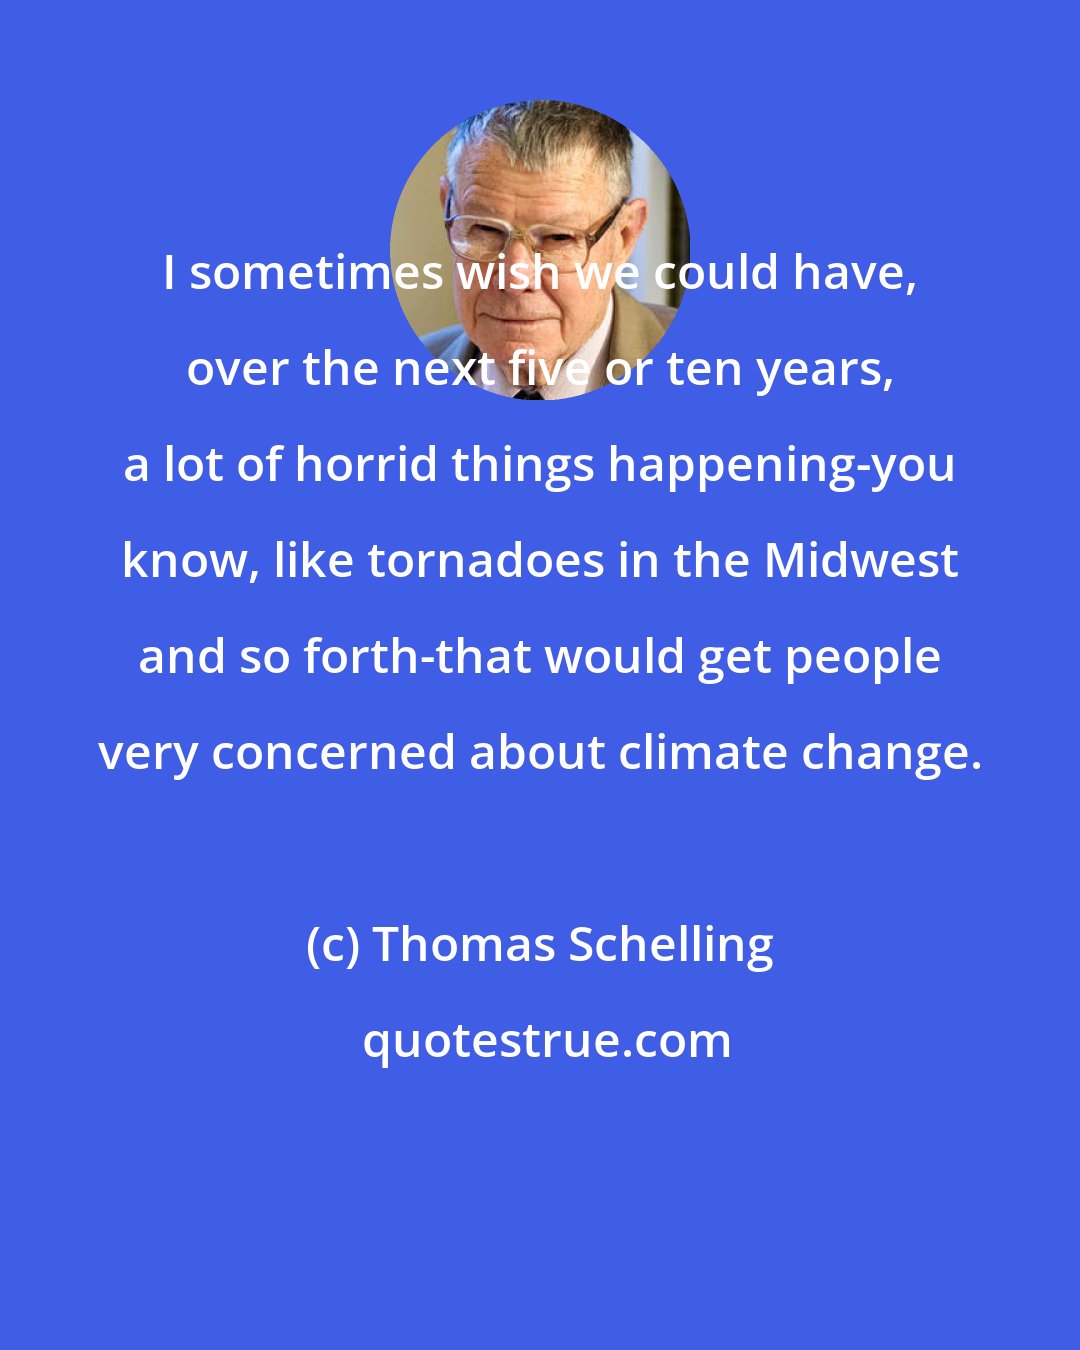 Thomas Schelling: I sometimes wish we could have, over the next five or ten years, a lot of horrid things happening-you know, like tornadoes in the Midwest and so forth-that would get people very concerned about climate change.